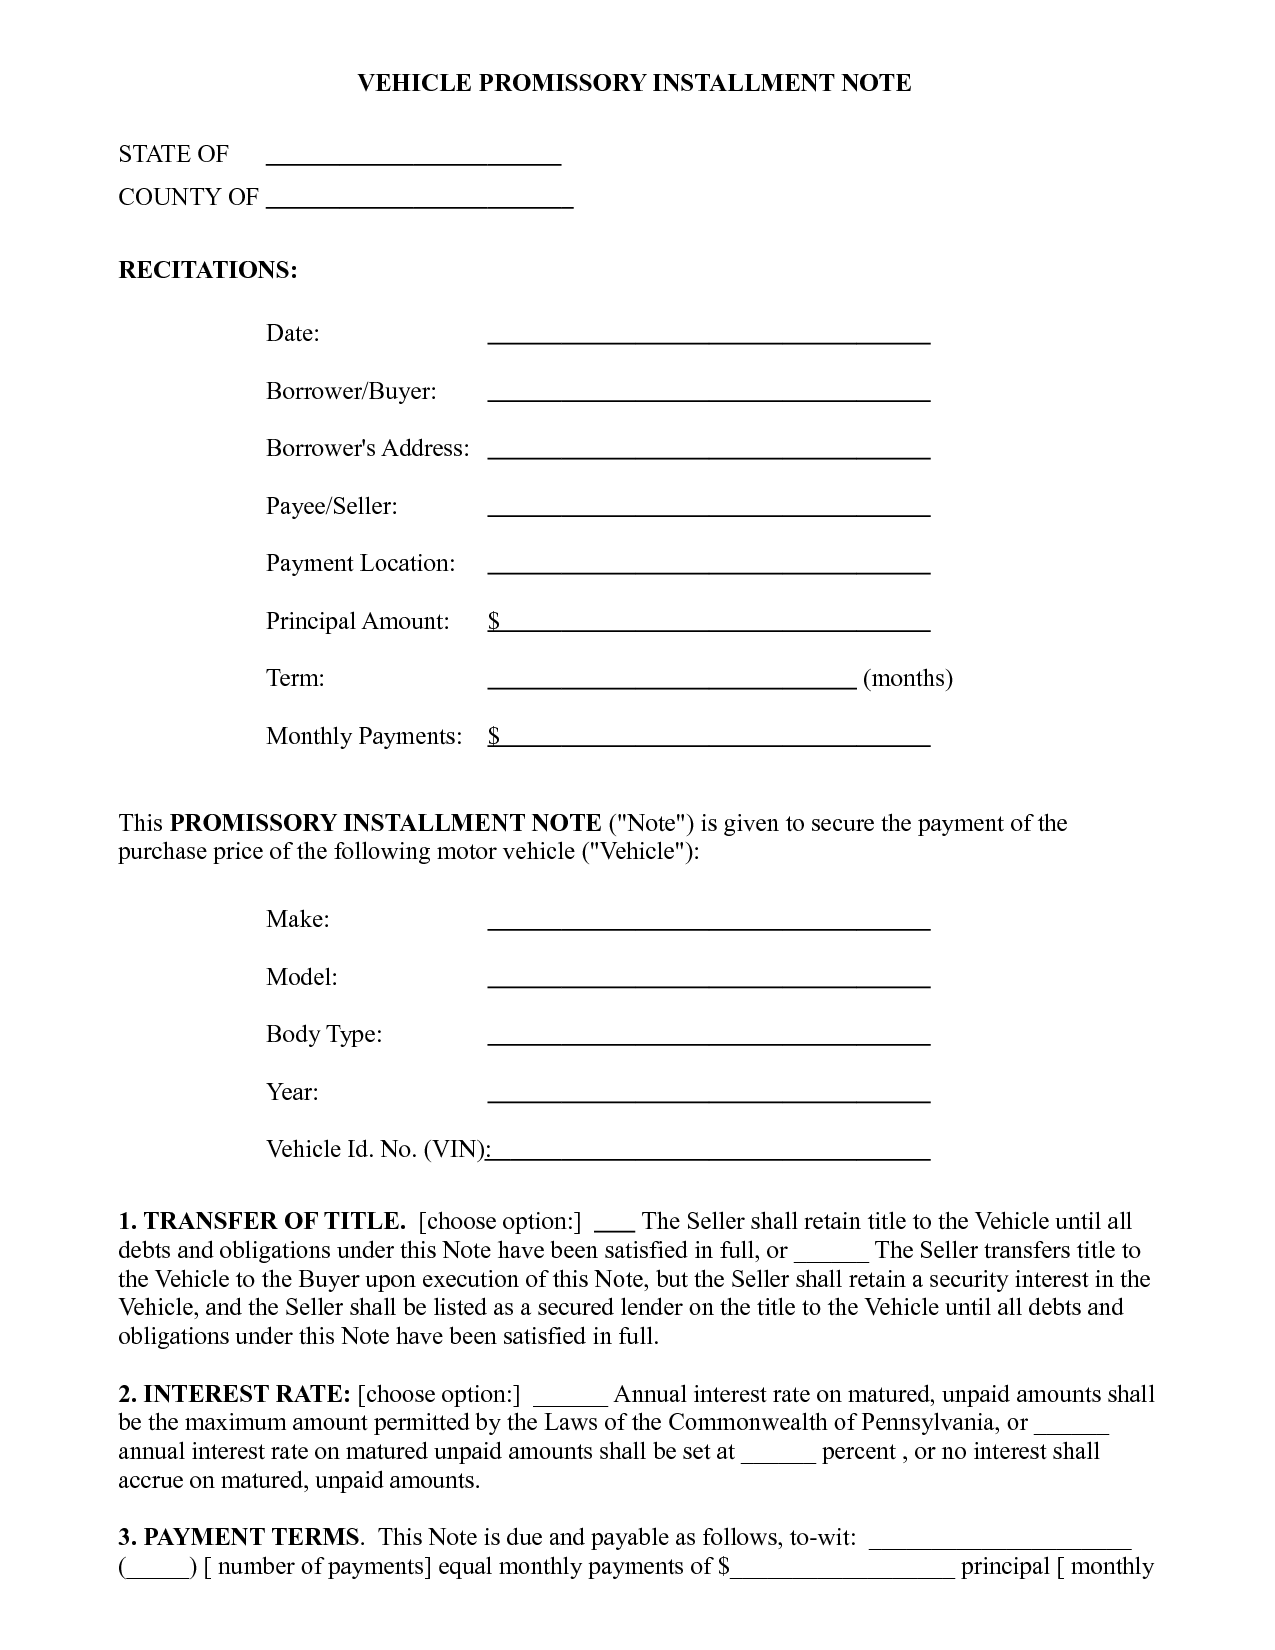 Promissory Note Template Intended For Auto Promissory Note Template